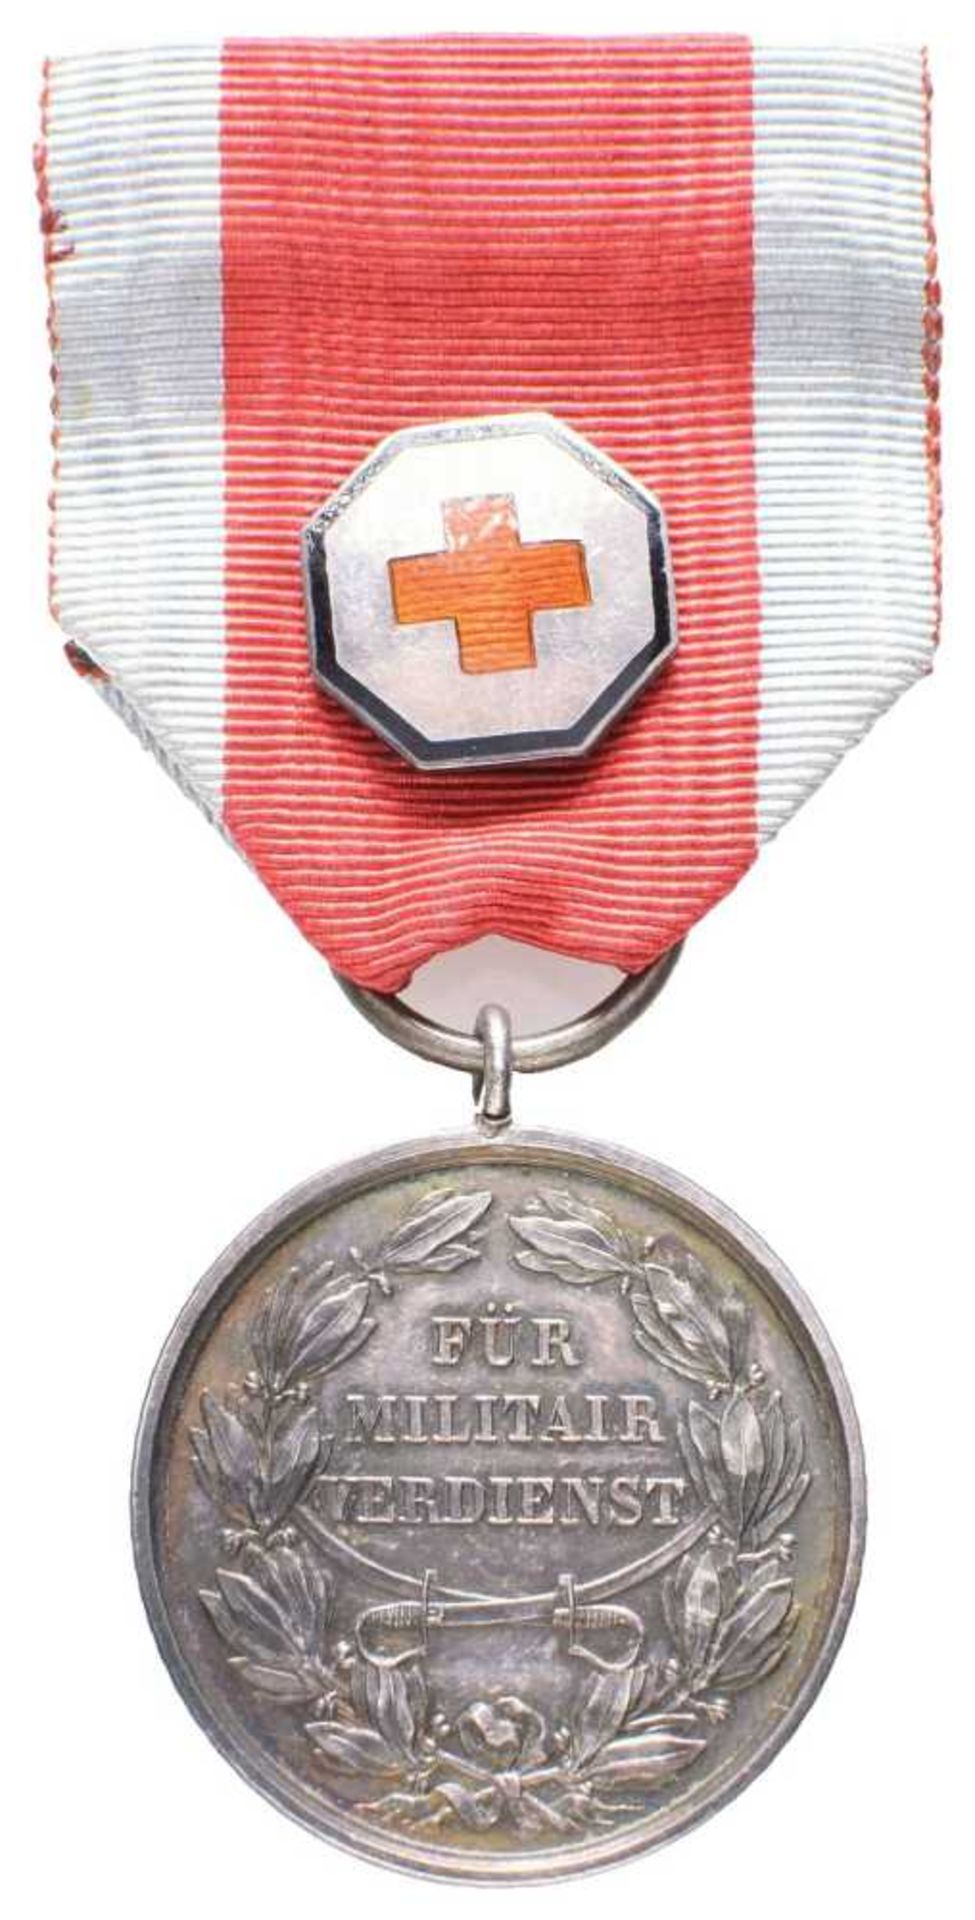 Schaumburg Lippe, silver military merit medal with enamelled Genevan cross on the volume, silver, OE